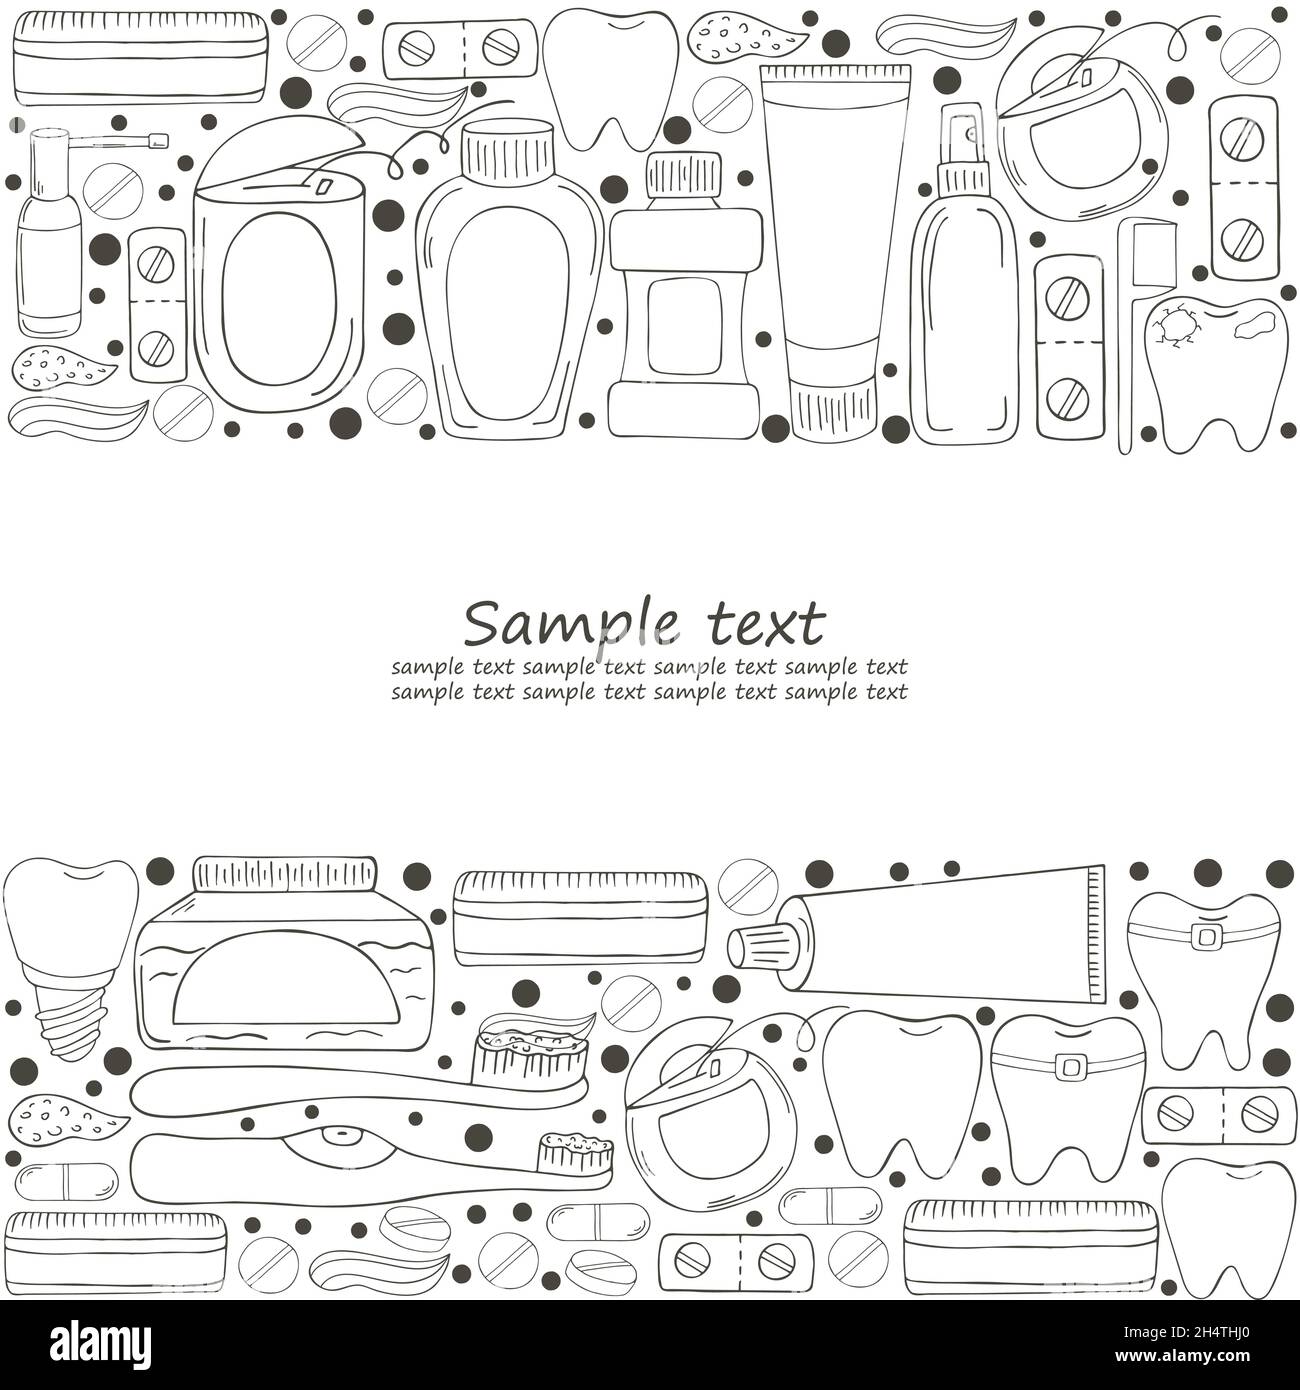 Coloring frame, text. Set of elements for the care of the oral cavity in hand draw style. Teeth cleaning, dental health. Teeth, floss, brush, paste, r Stock Vector